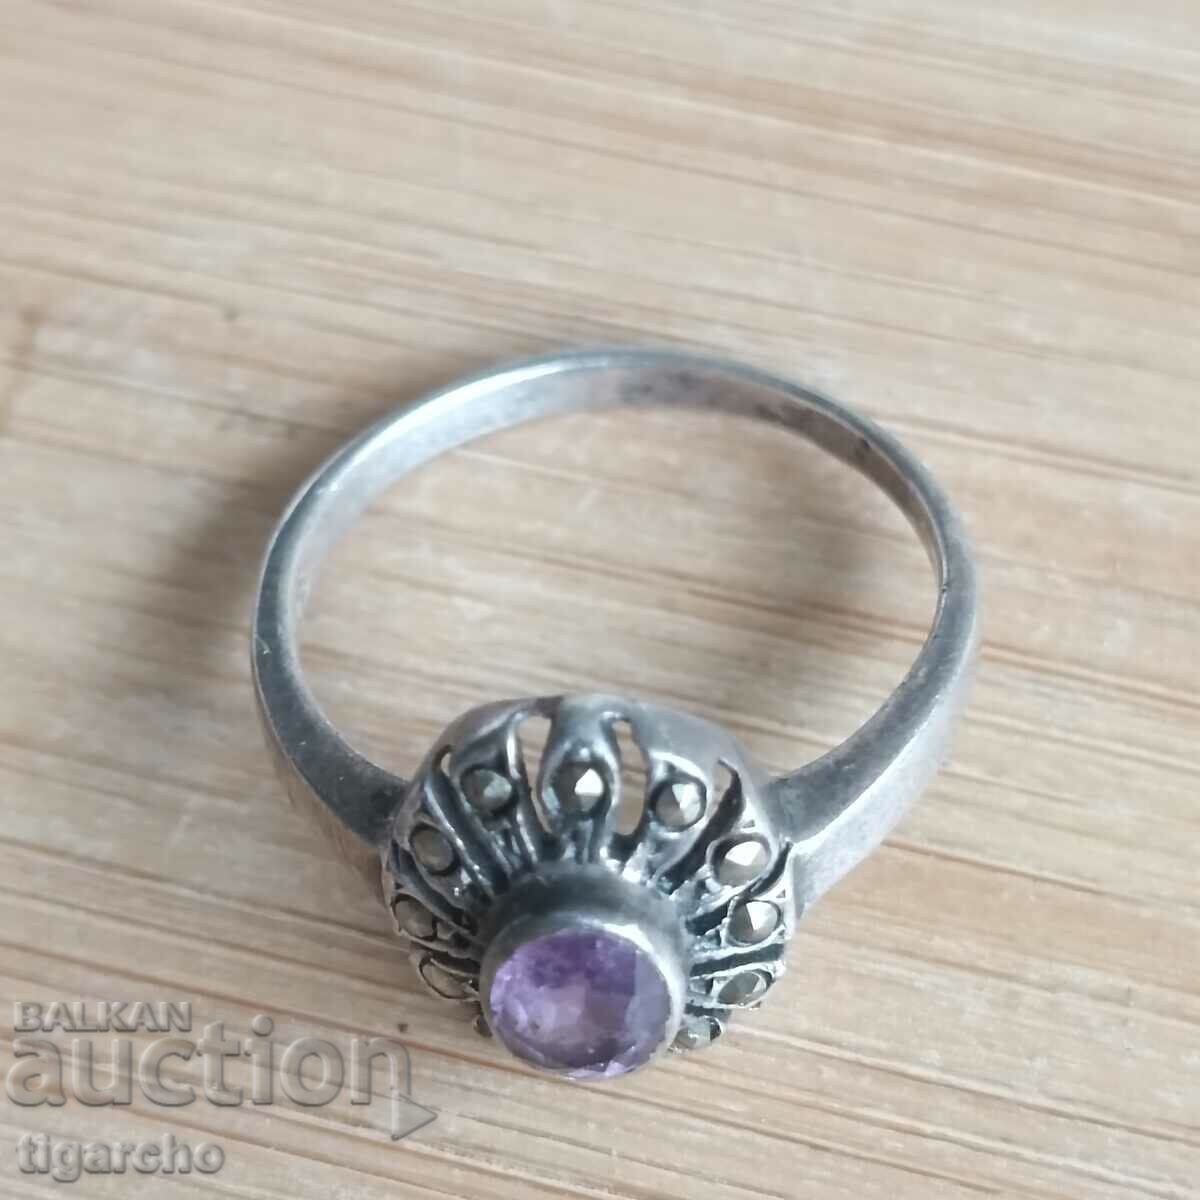 Old lady's silver ring